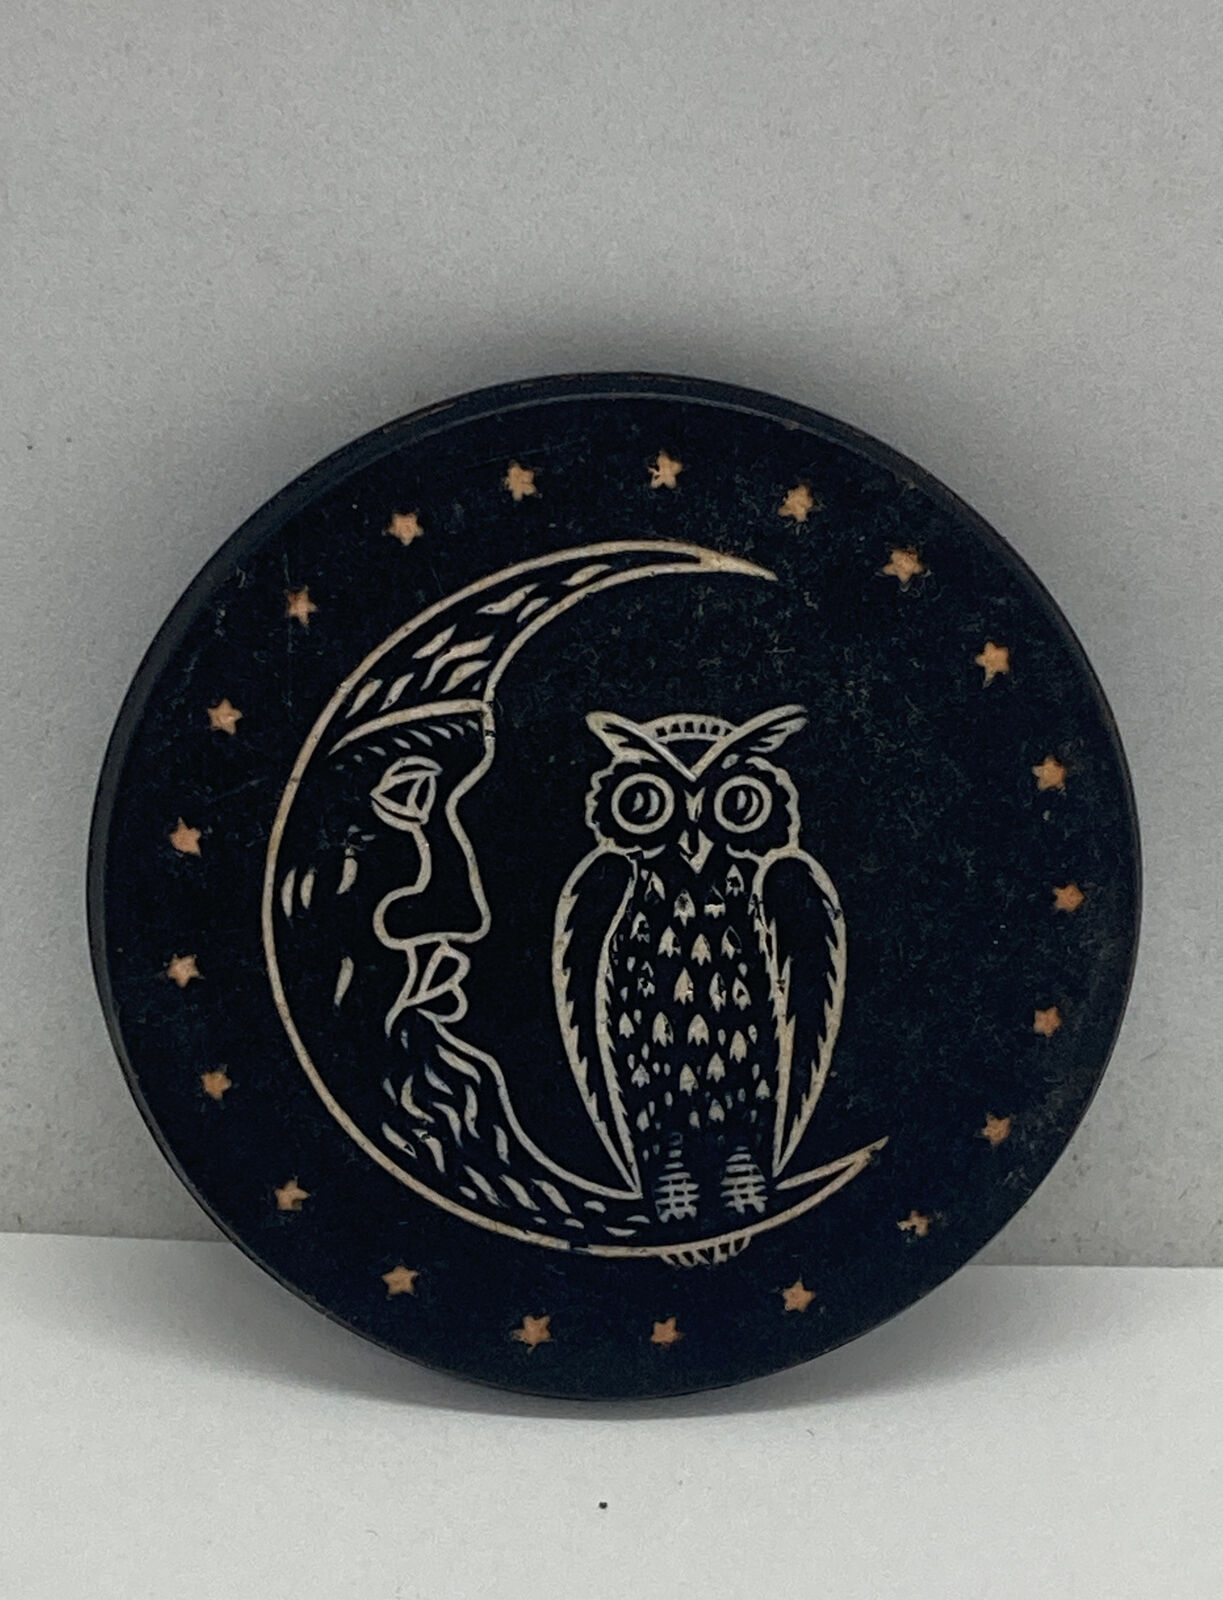 Vintage Clay Poker Chip Owl On Crescent Moon Black/dark Blue Color 1 Piece Only